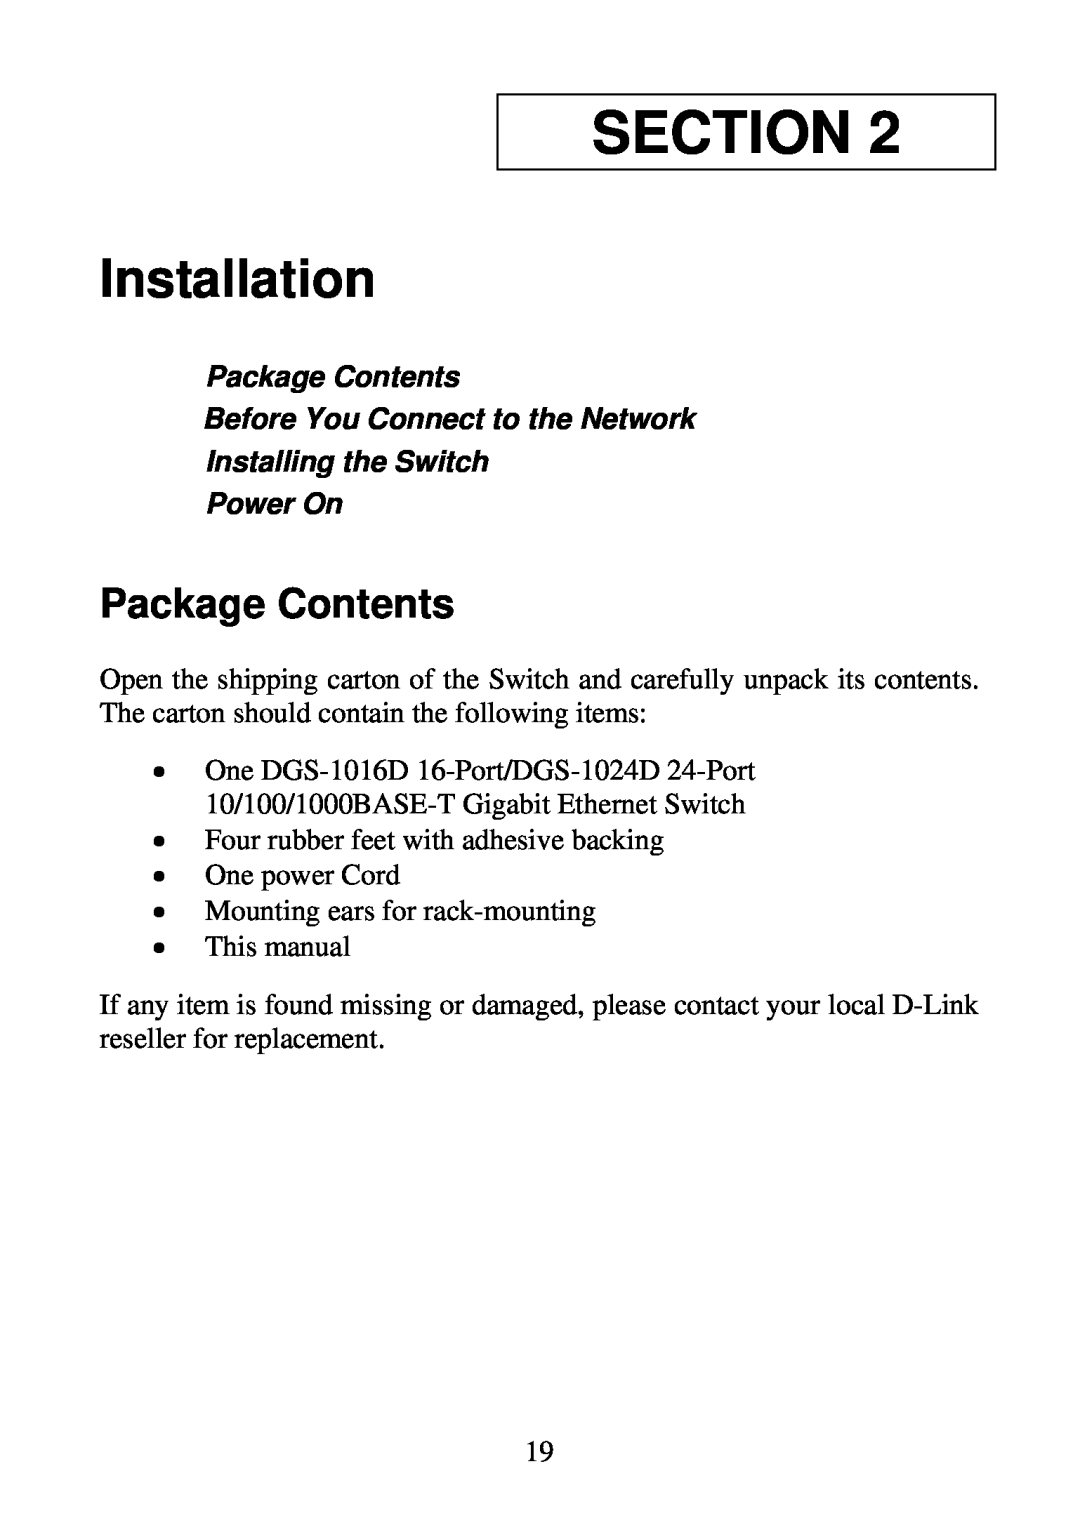 D-Link DGS-1016D Installation, Package Contents Before You Connect to the Network, Installing the Switch Power On 